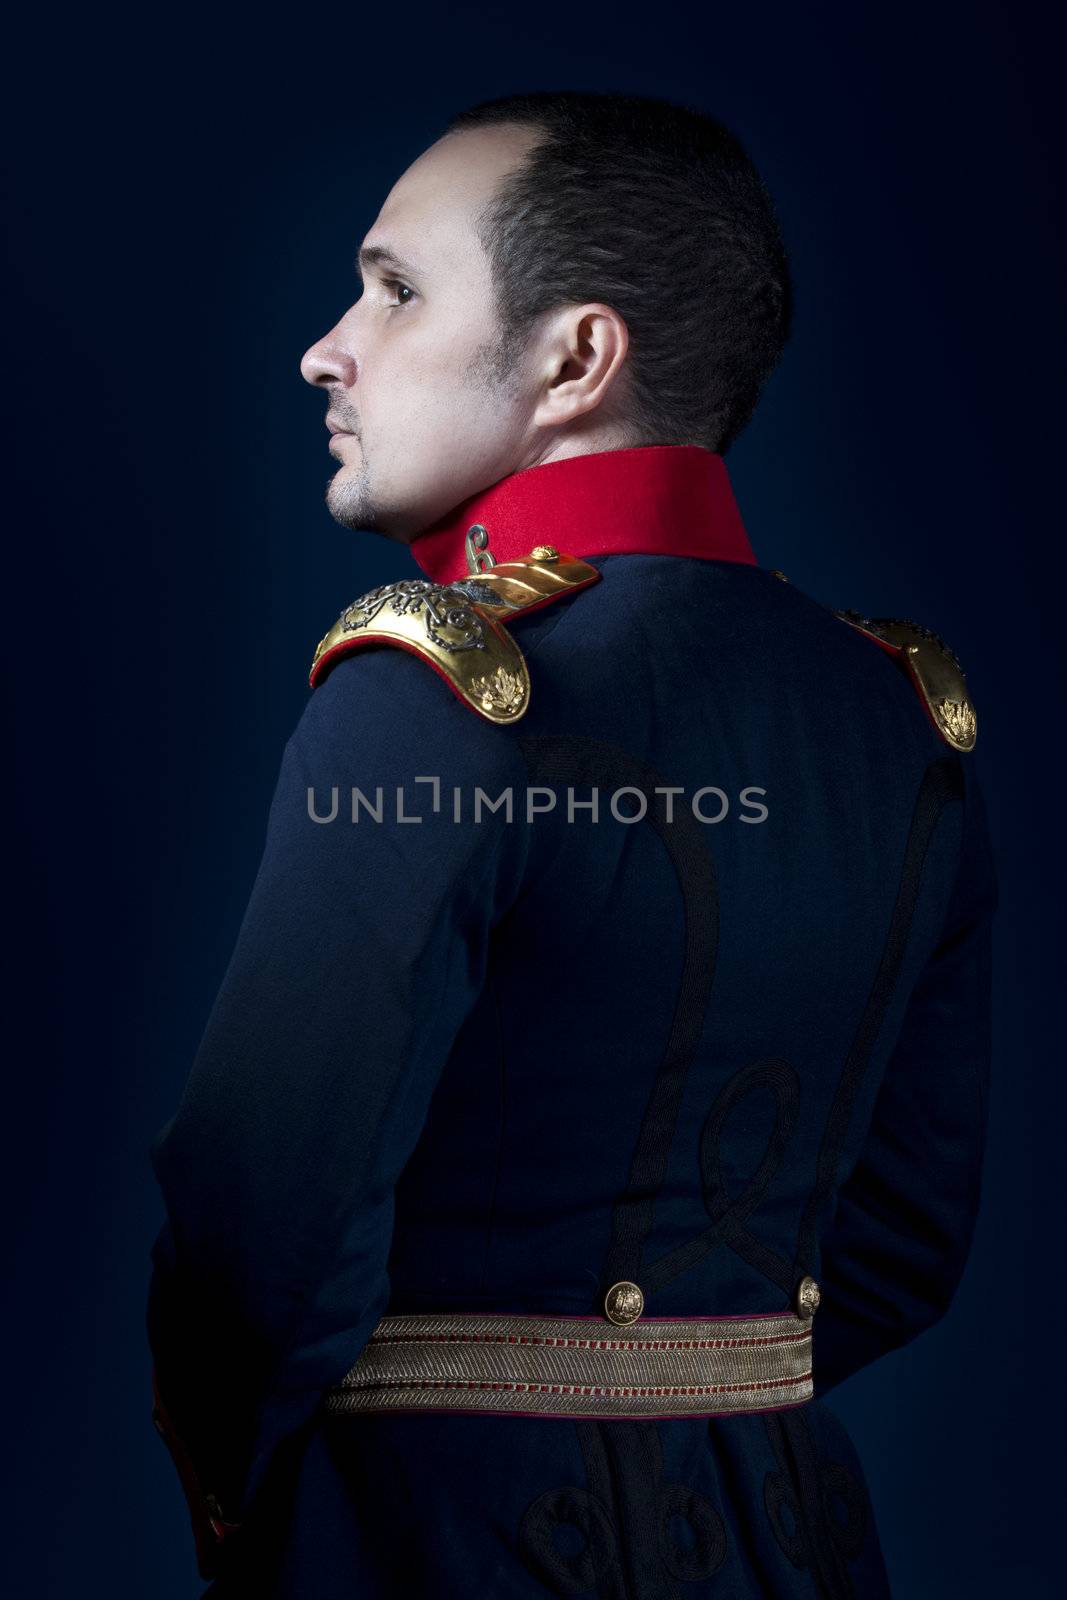 man wearing military jacket 19th century Spanish army, call of d by FernandoCortes